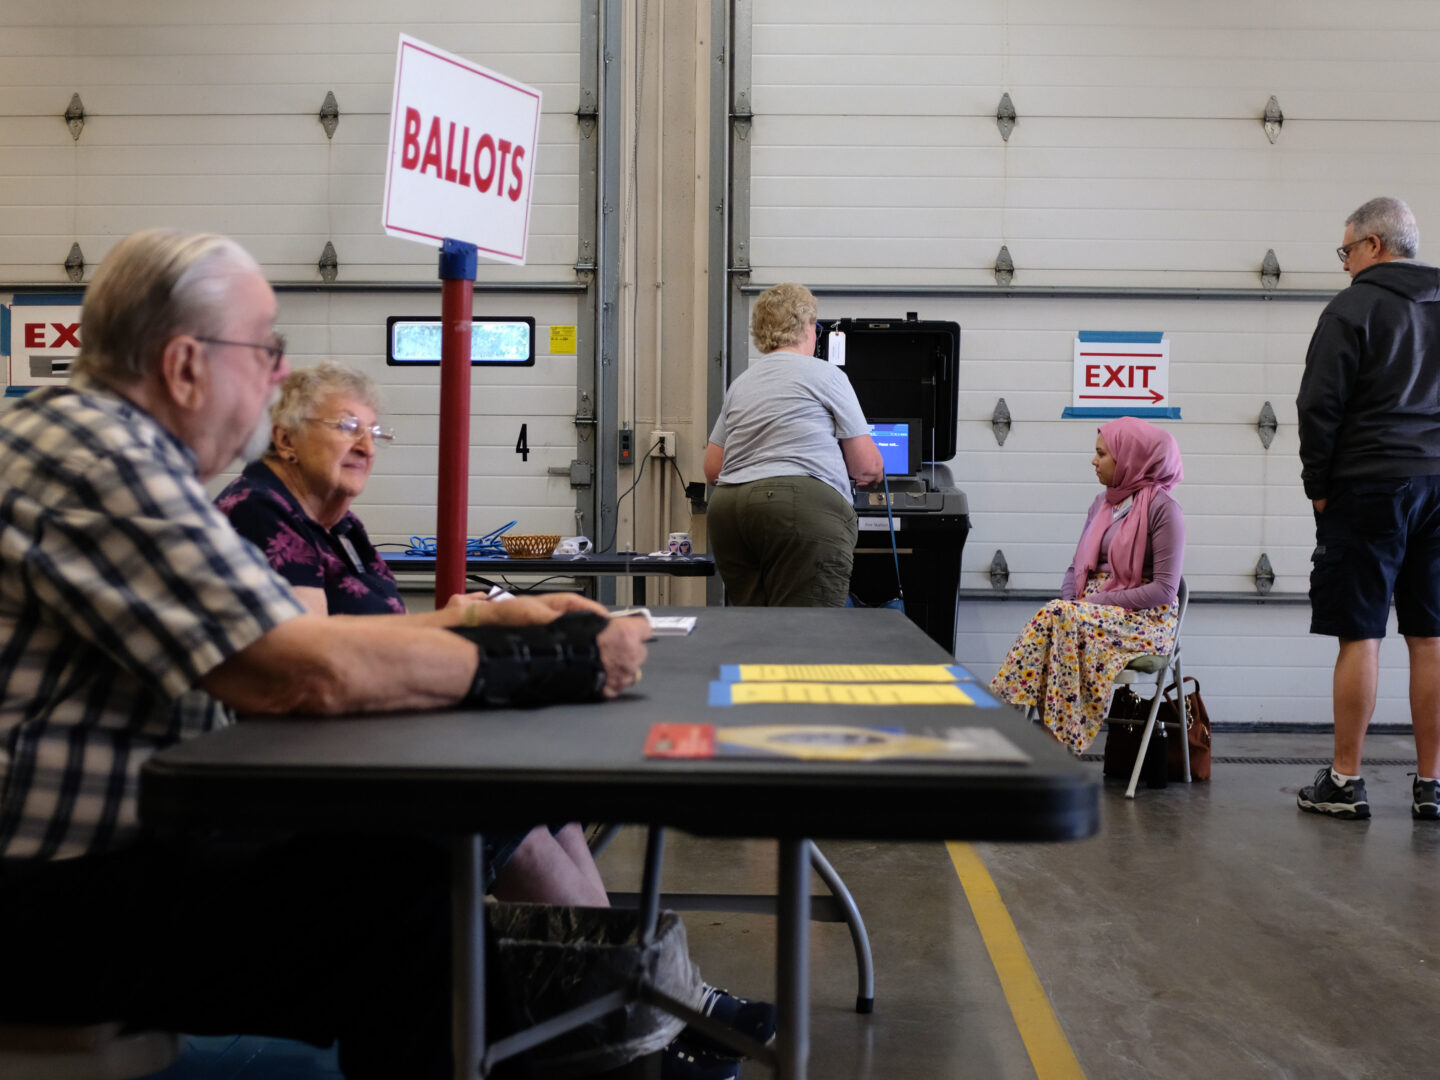 MILWAUKEE, WI - AUGUST 09: Poll workers and voters participate during Wisconsins state primary day on August 9, 2022 at the Village Hall of Waukesha in Waukesha, WI. The race is expected to be tight with both Republican candidates Tim Michels who has been endorsed by former President Donald Trump, and Rebecca Kleefisch who as been endorsed by former Vice President Mike Pence. ((Photo by Alex Wroblewski/Getty Images)